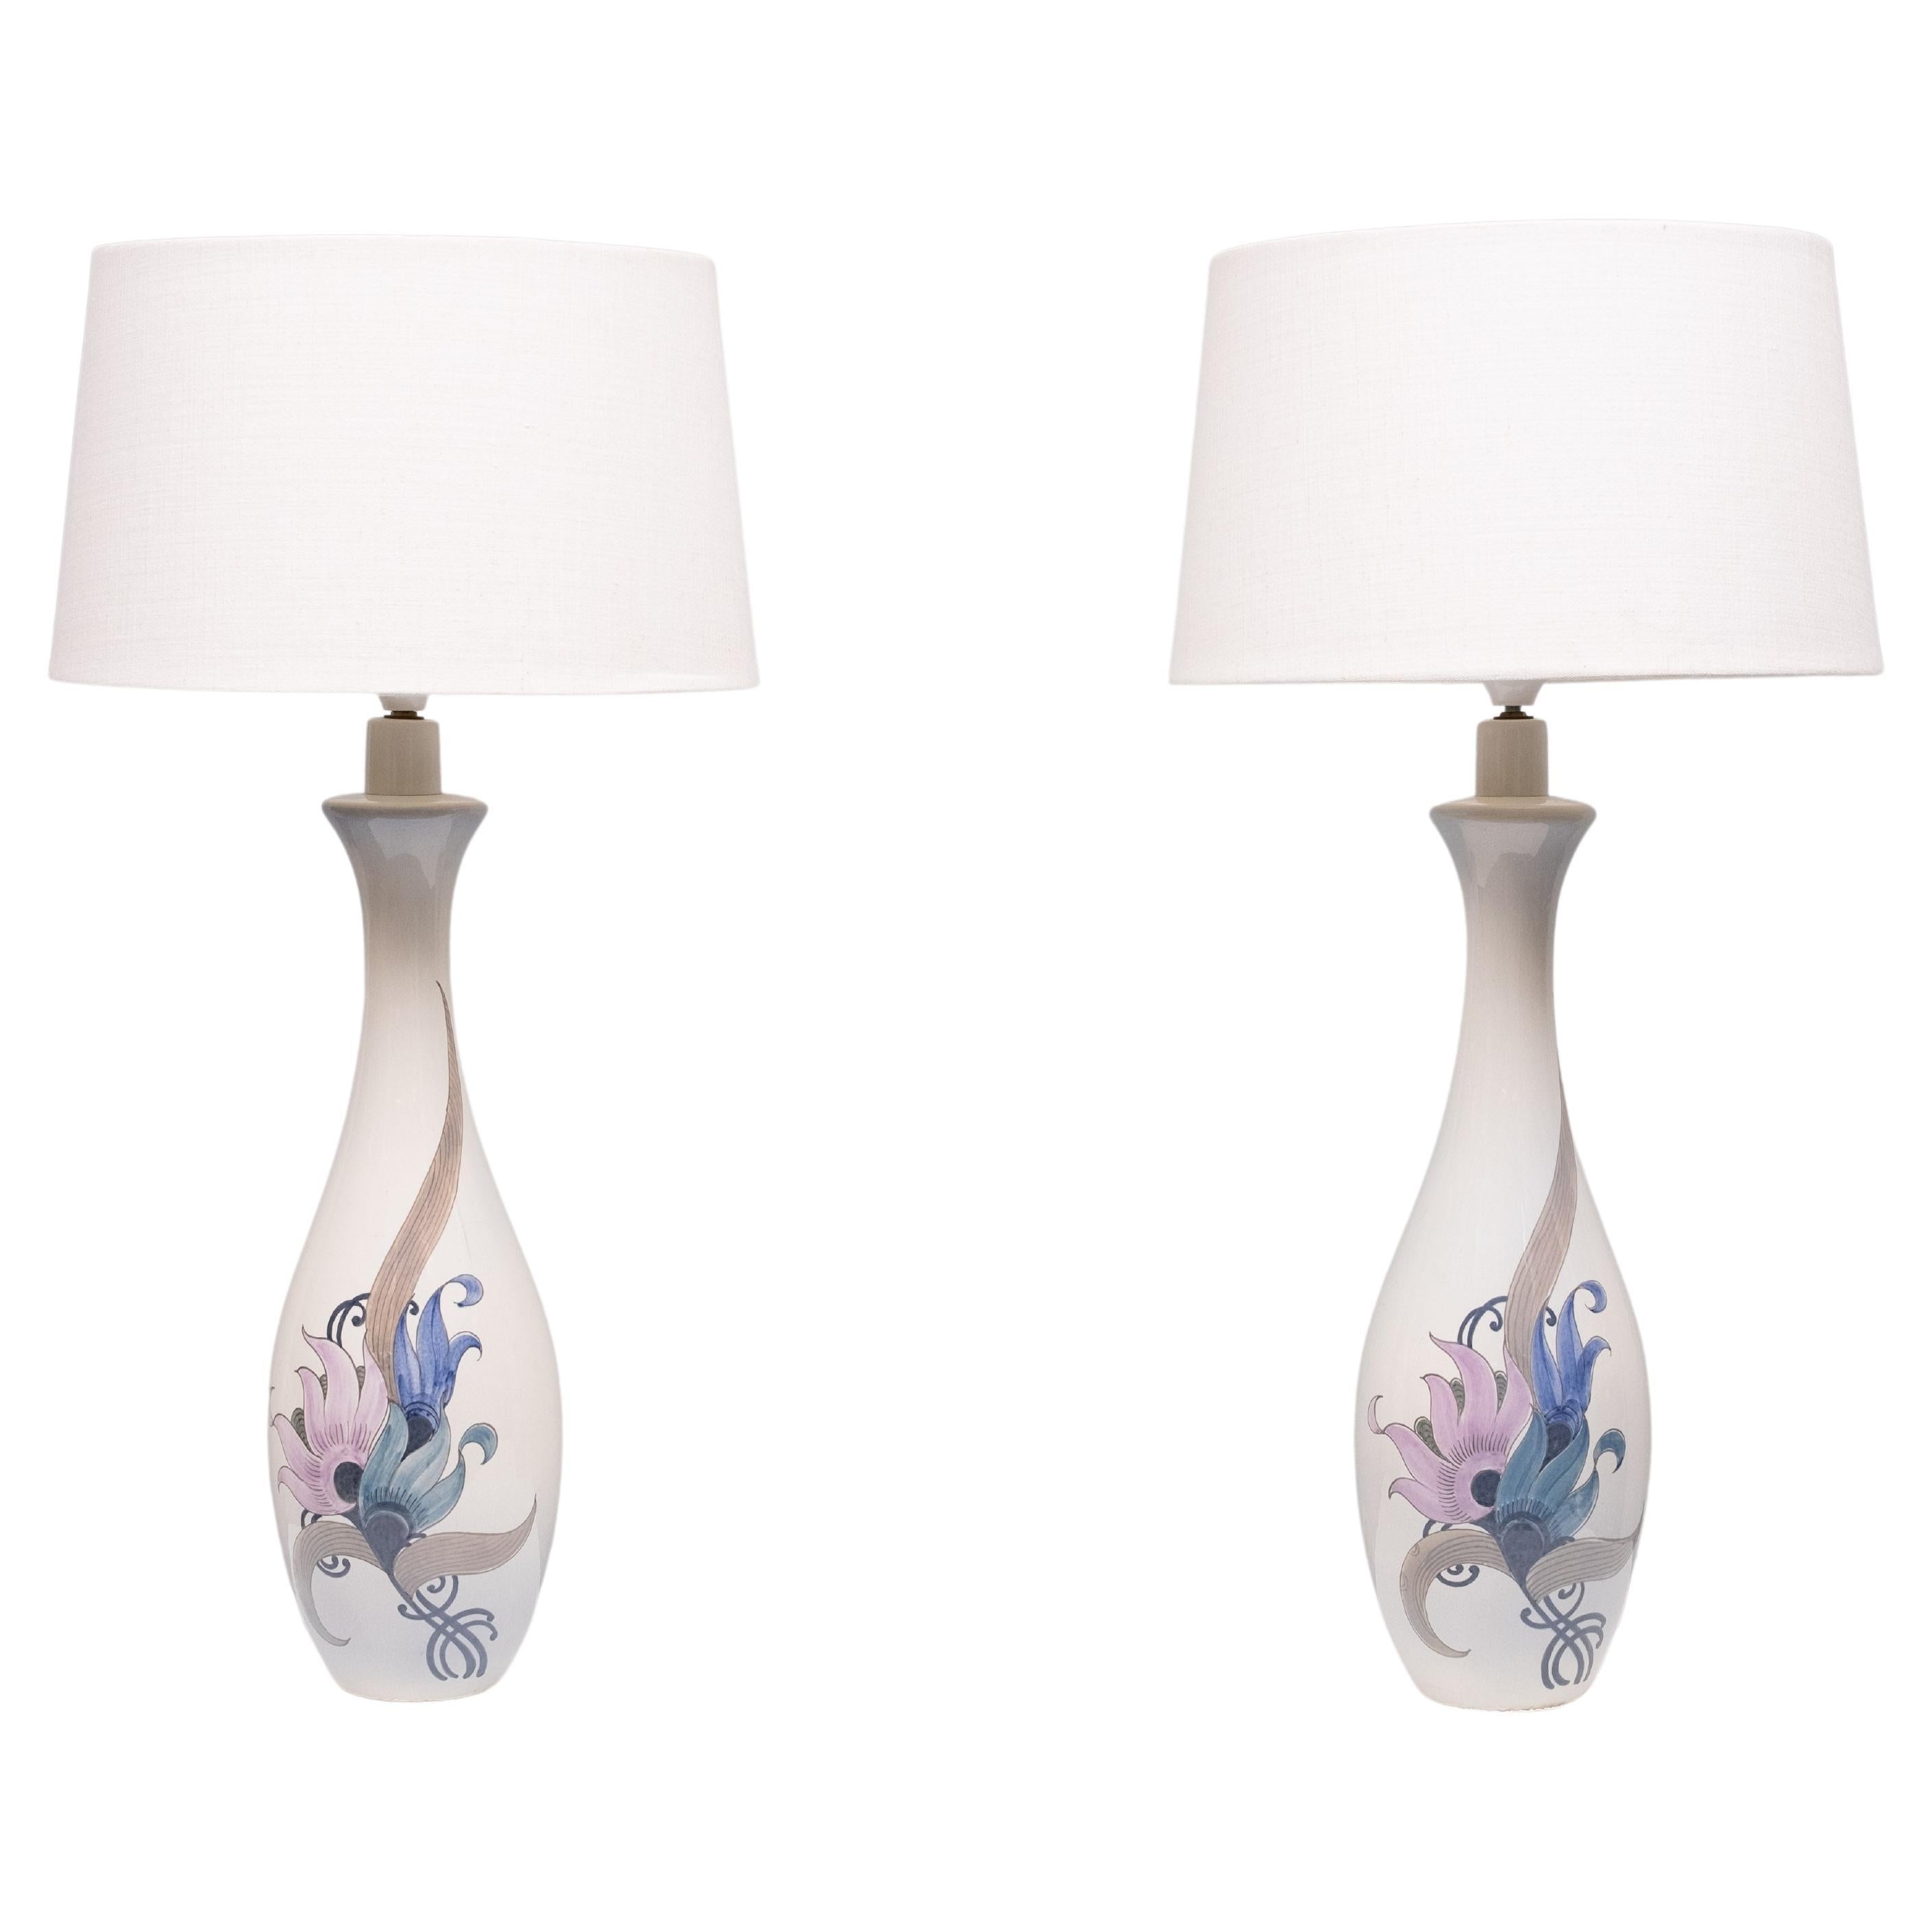 Pair Large Ceramic Table lamps Schoonhoven Plateel  1970s  For Sale